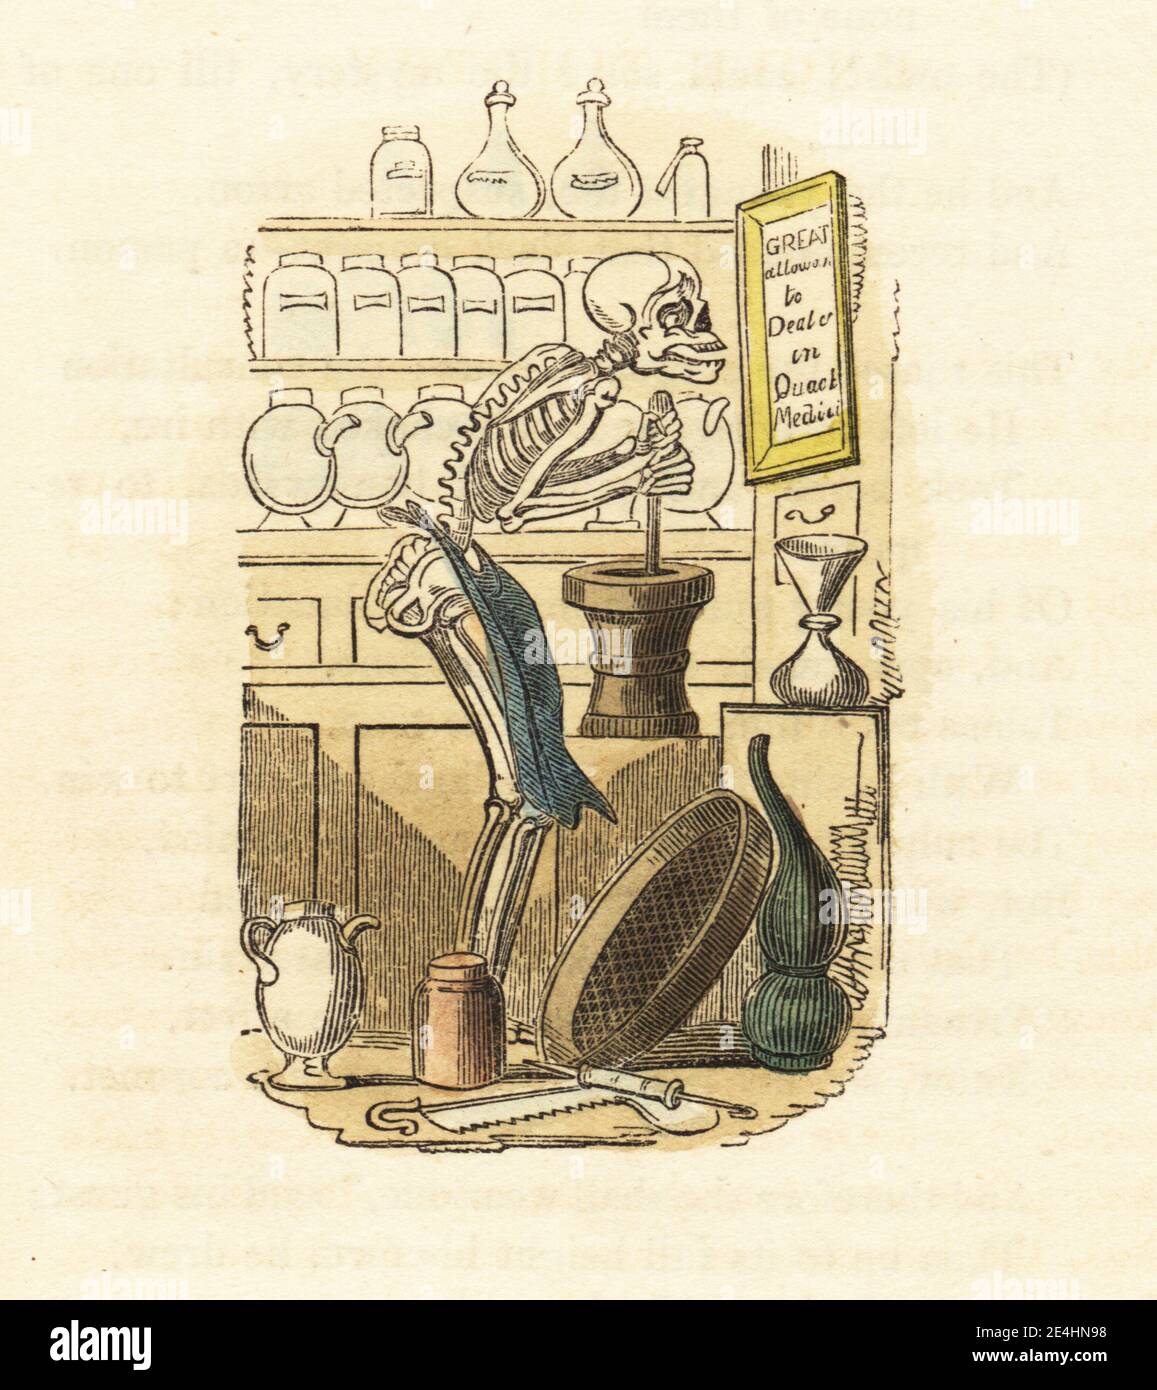 Skeleton of Death in a quack doctor's apothecary shop, wearing an apron mixing poison in a mortar and pestle. The workshop decorated with jars, phials, sieve, surgical saw and syringe. Great Allows to Deal in Quack Medicine. Handcoloured wood engraving after an illustration by Thomas Rowlandson from W. H. Harrison’s The Humourist, a Companion for the Christmas Fireside, Rudolph Ackermann, 19 Strand, London, 1831. Stock Photo